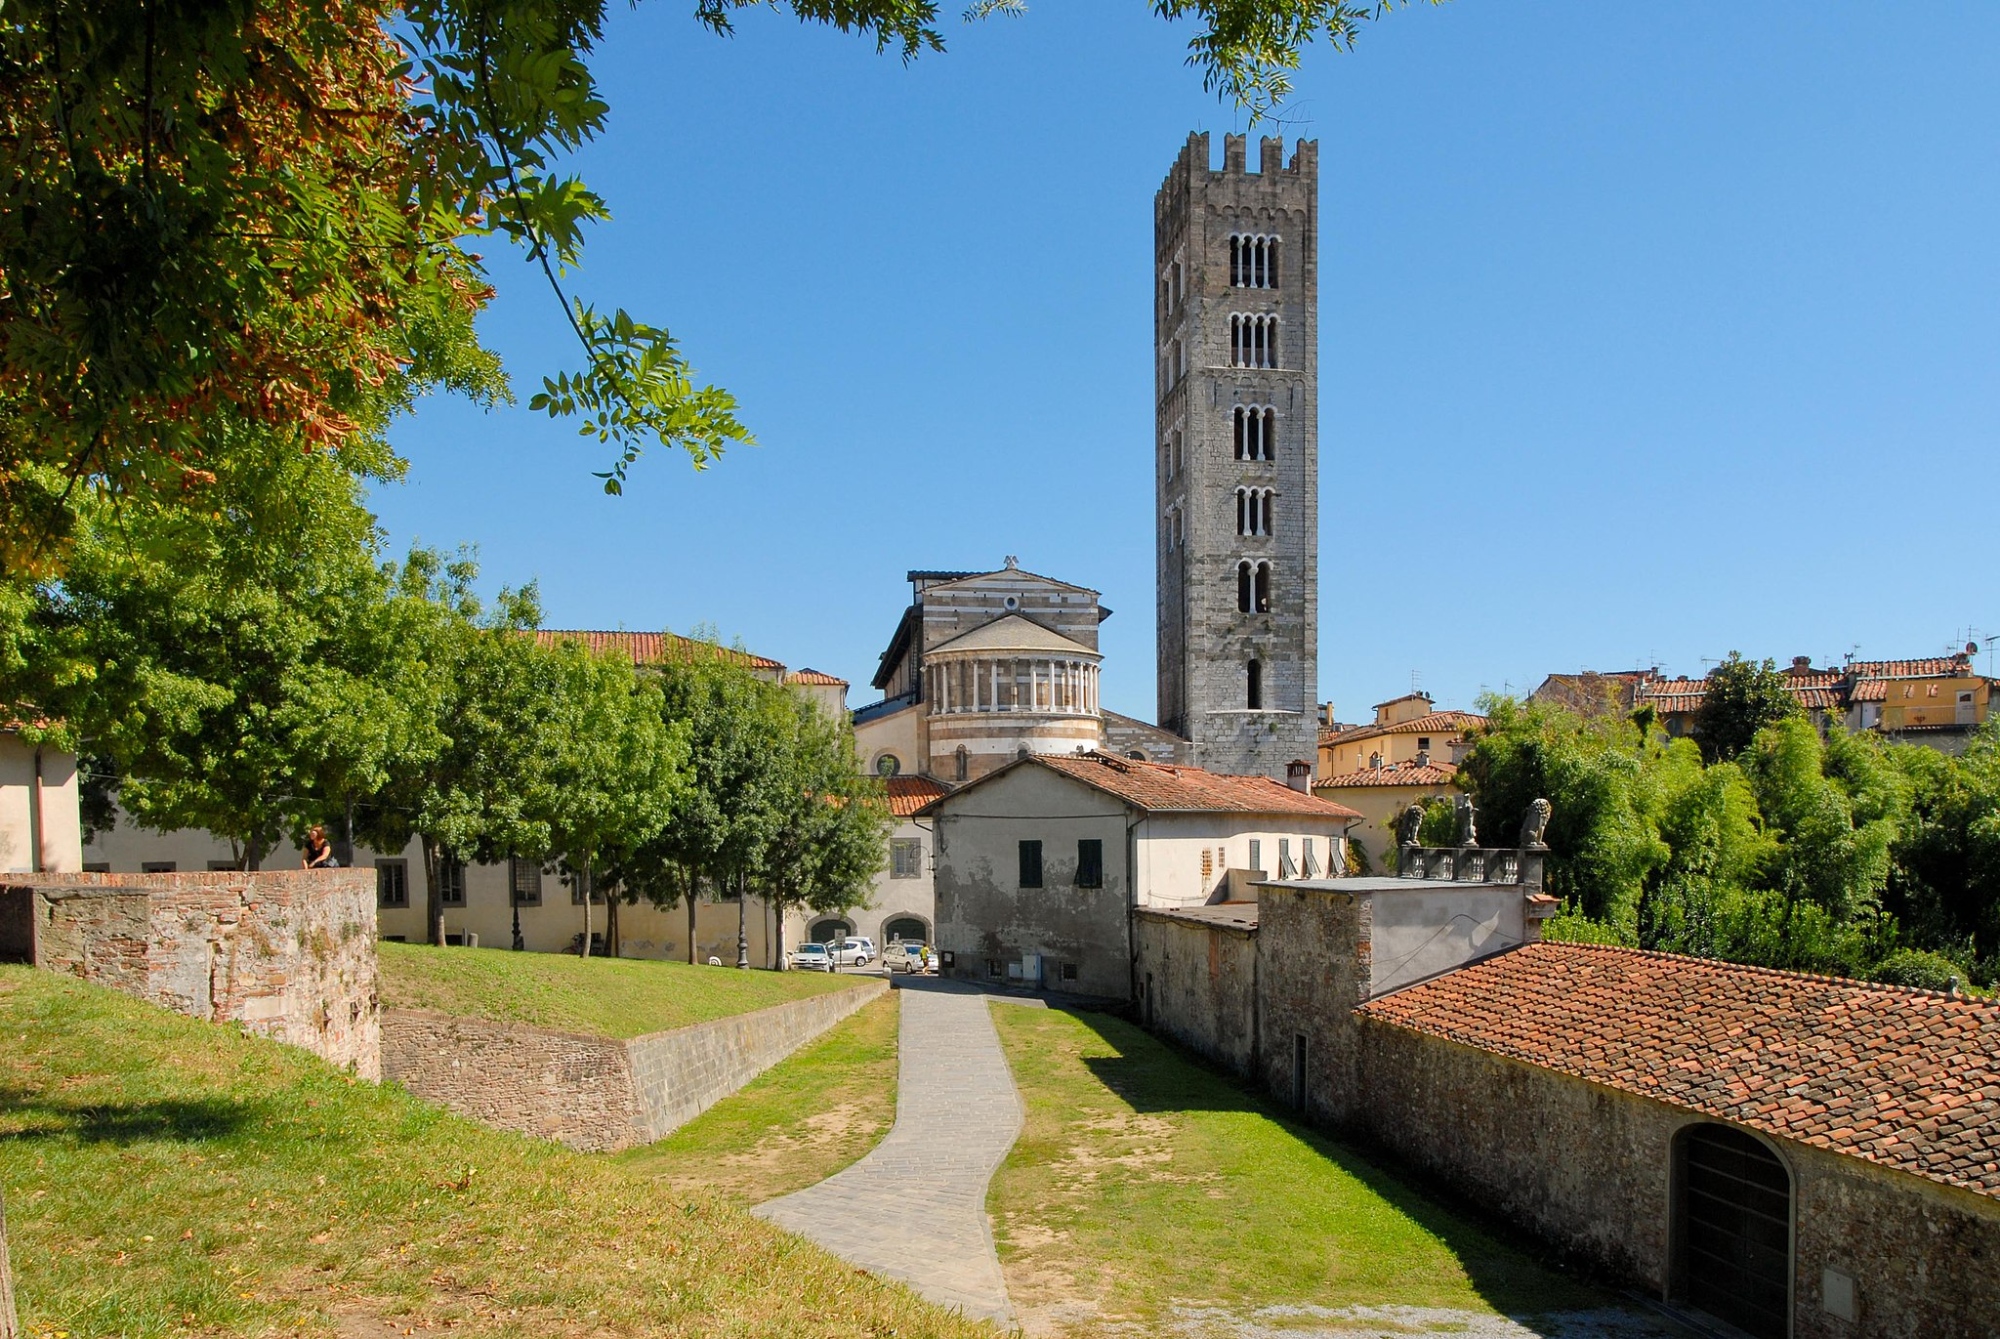 A view of the Church of San Frediano from the ancient walls of Lucca